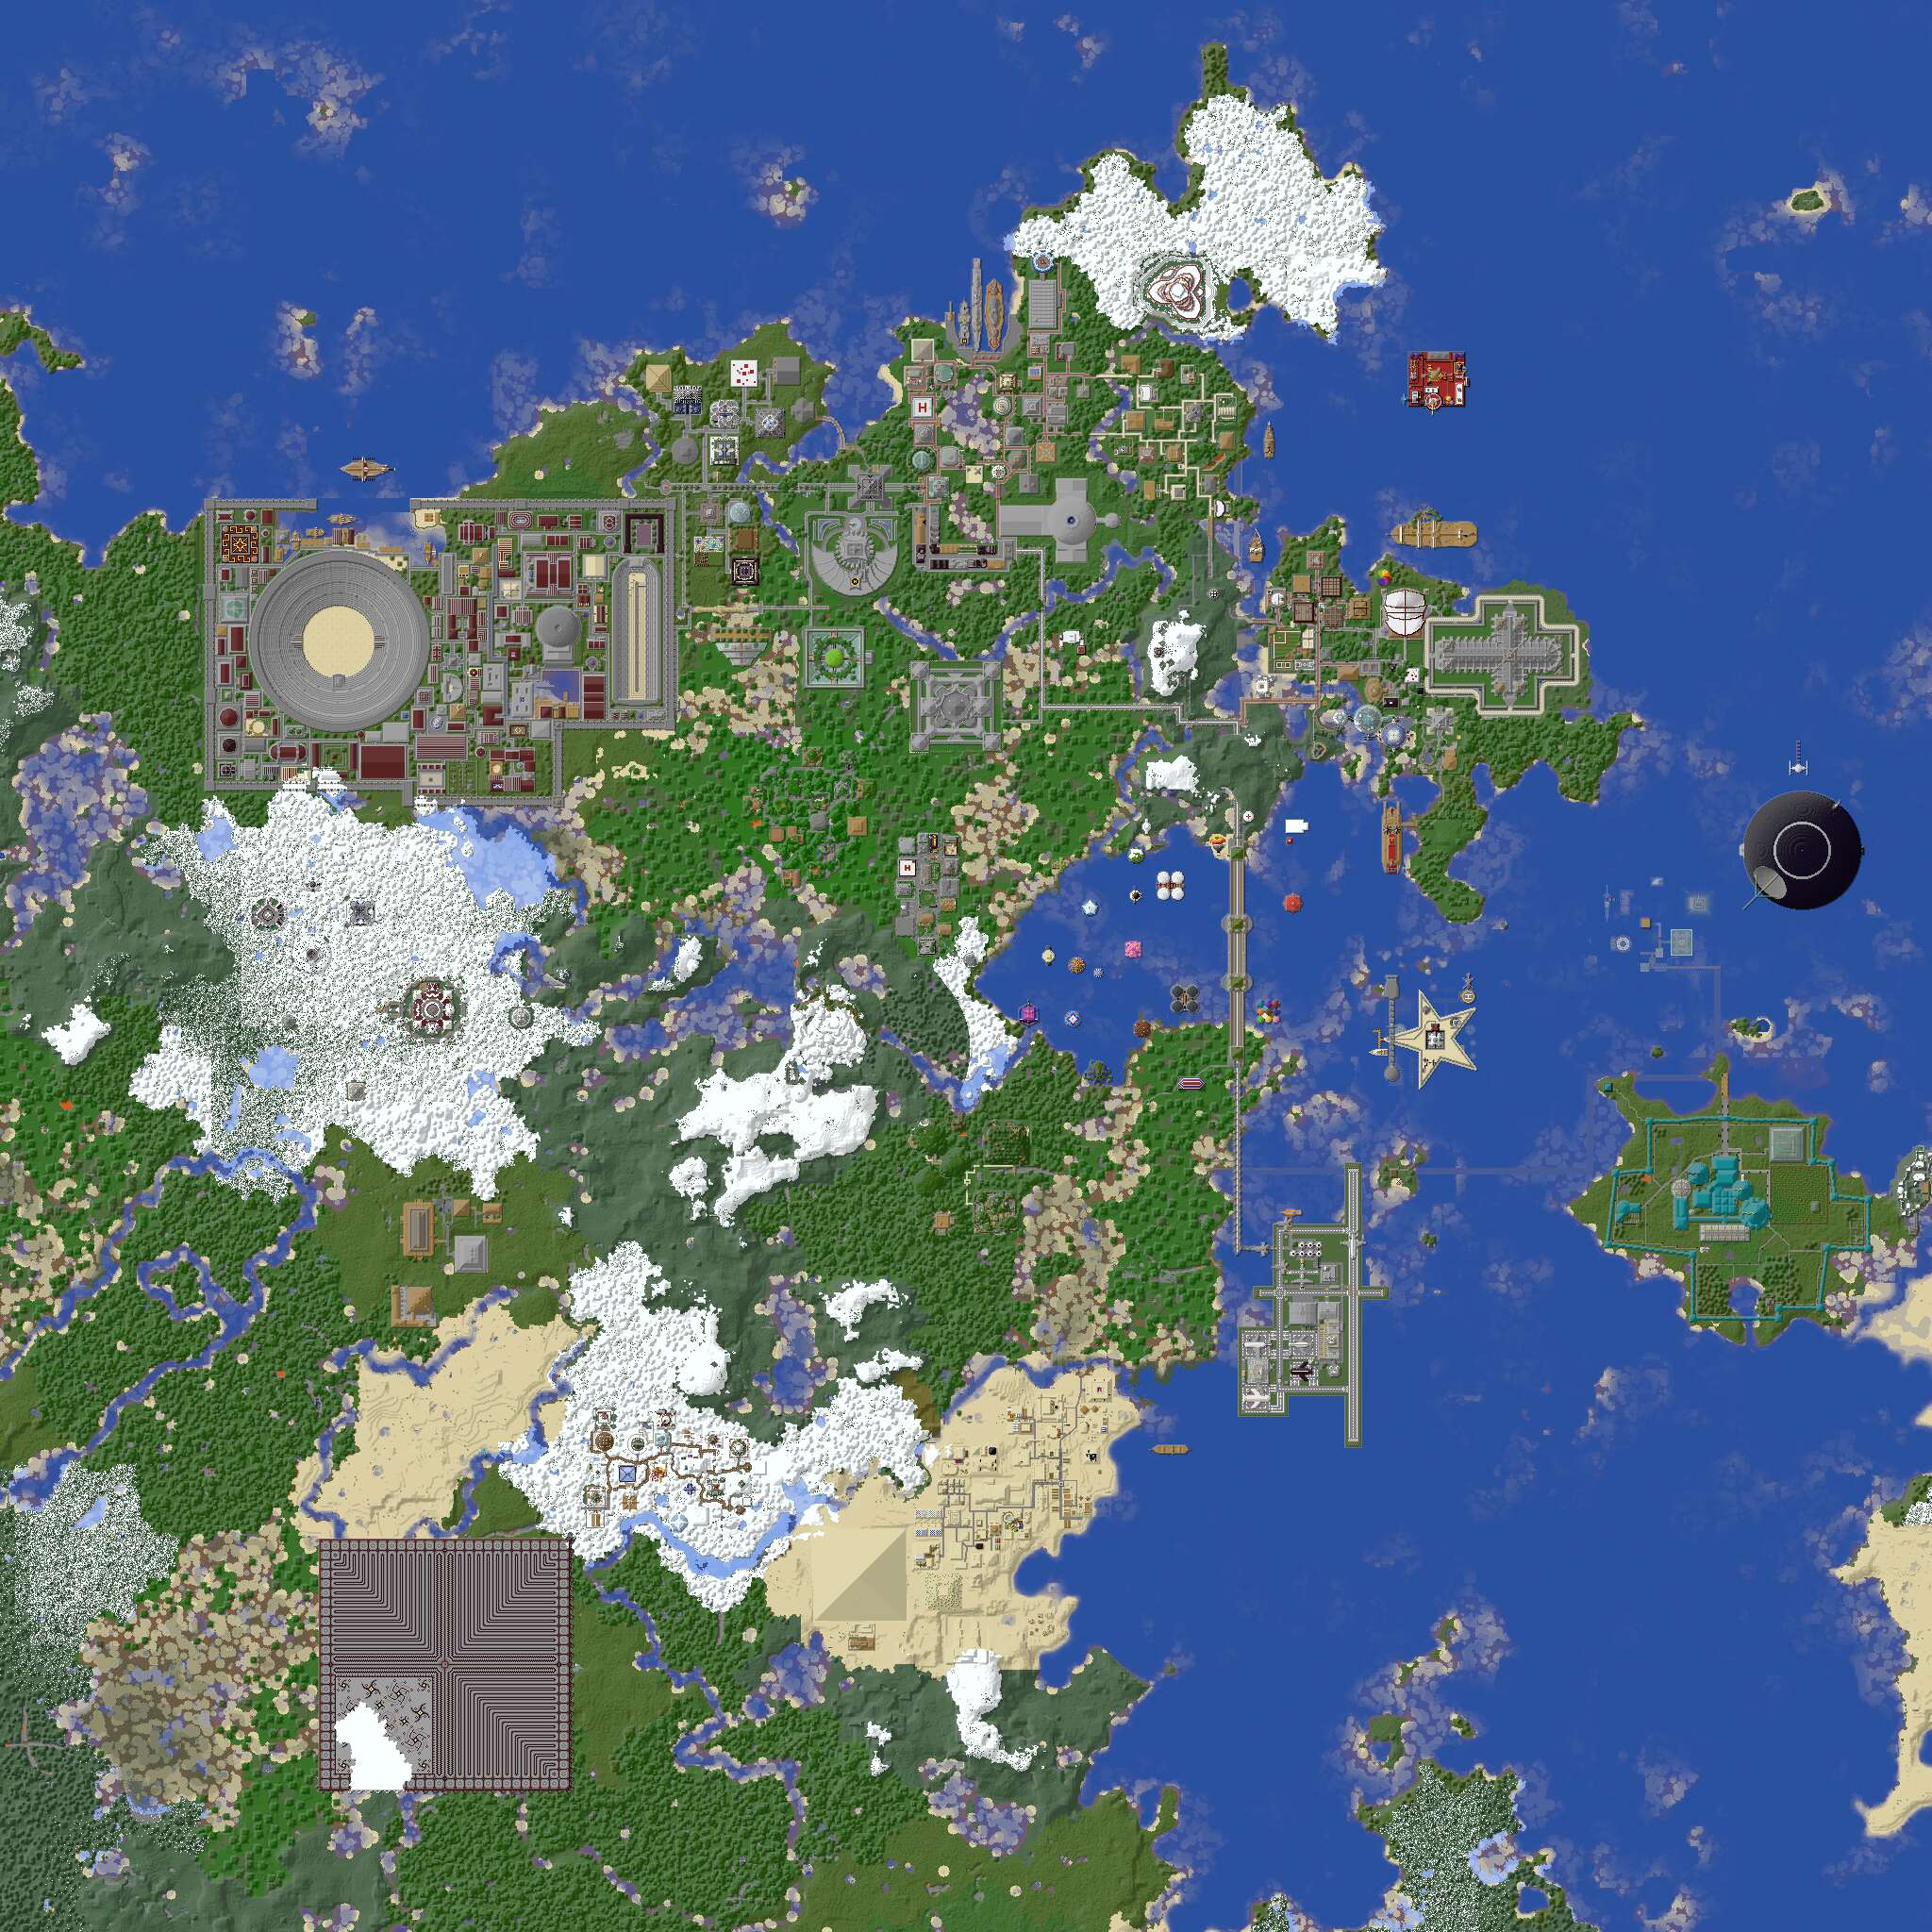 minecraft earth map download 1.12.2